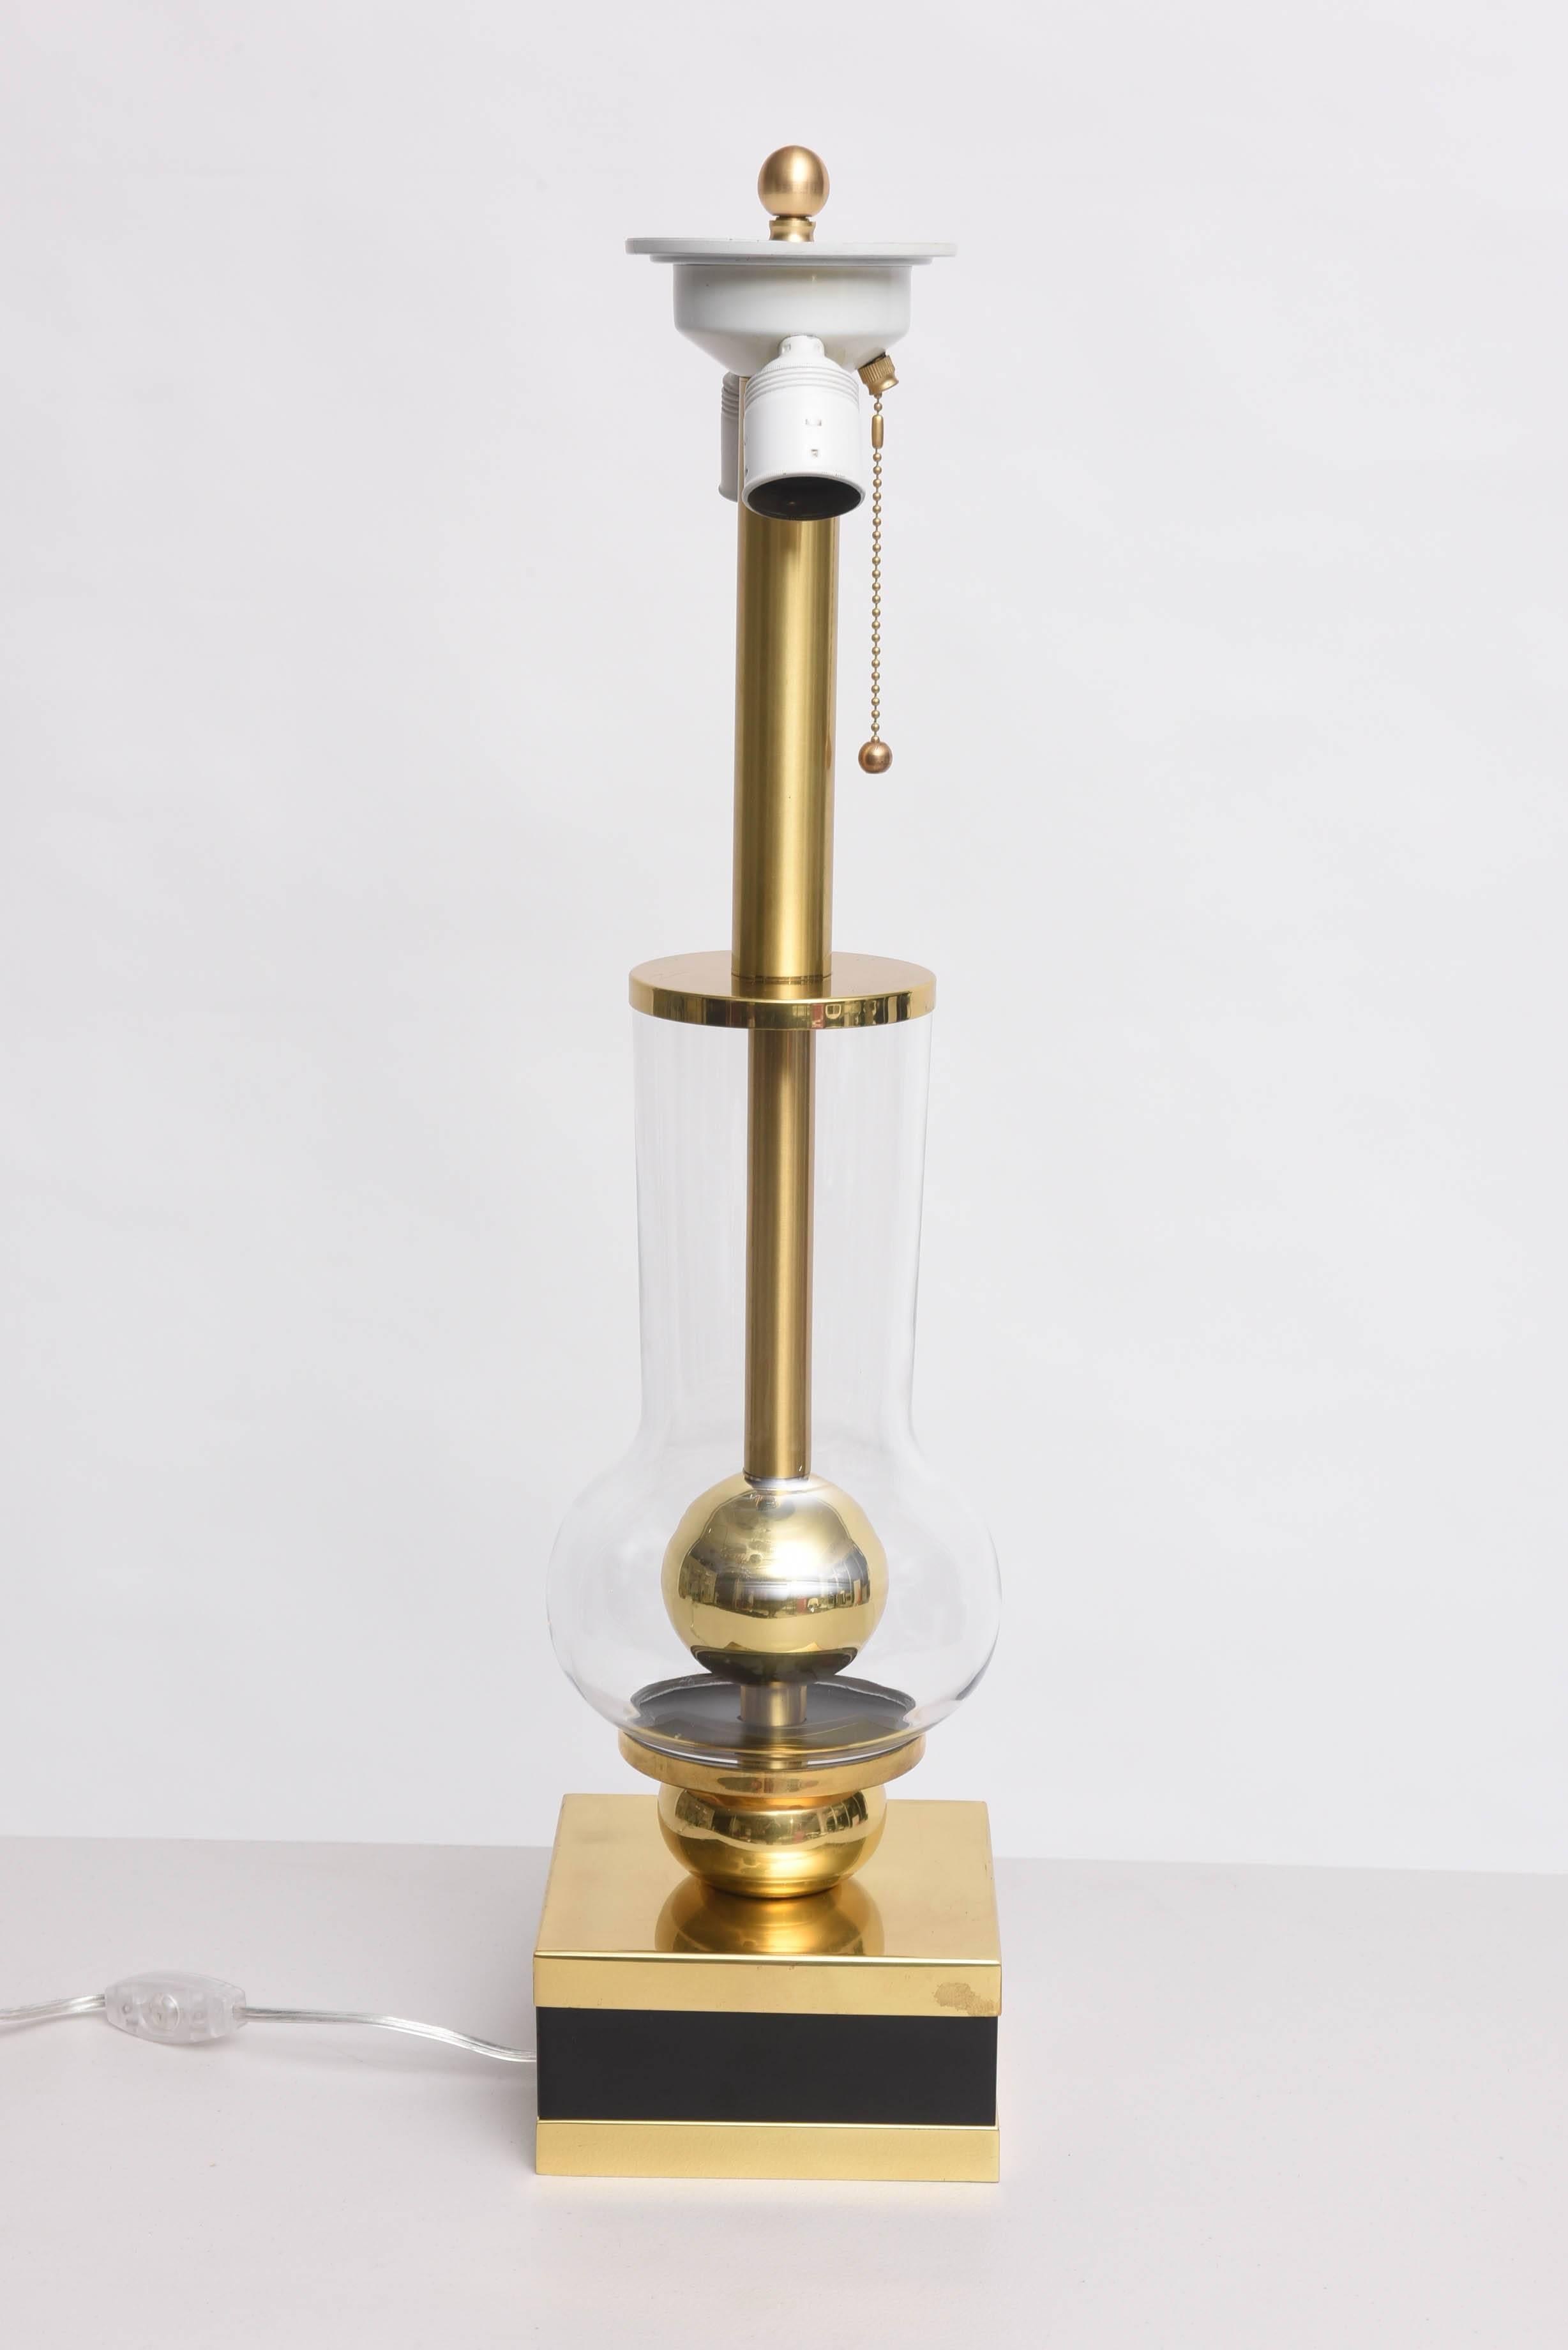 20th Century Midcentury Table Lamp, Brass and Glass, Attributed to Studio Willy Rizzo